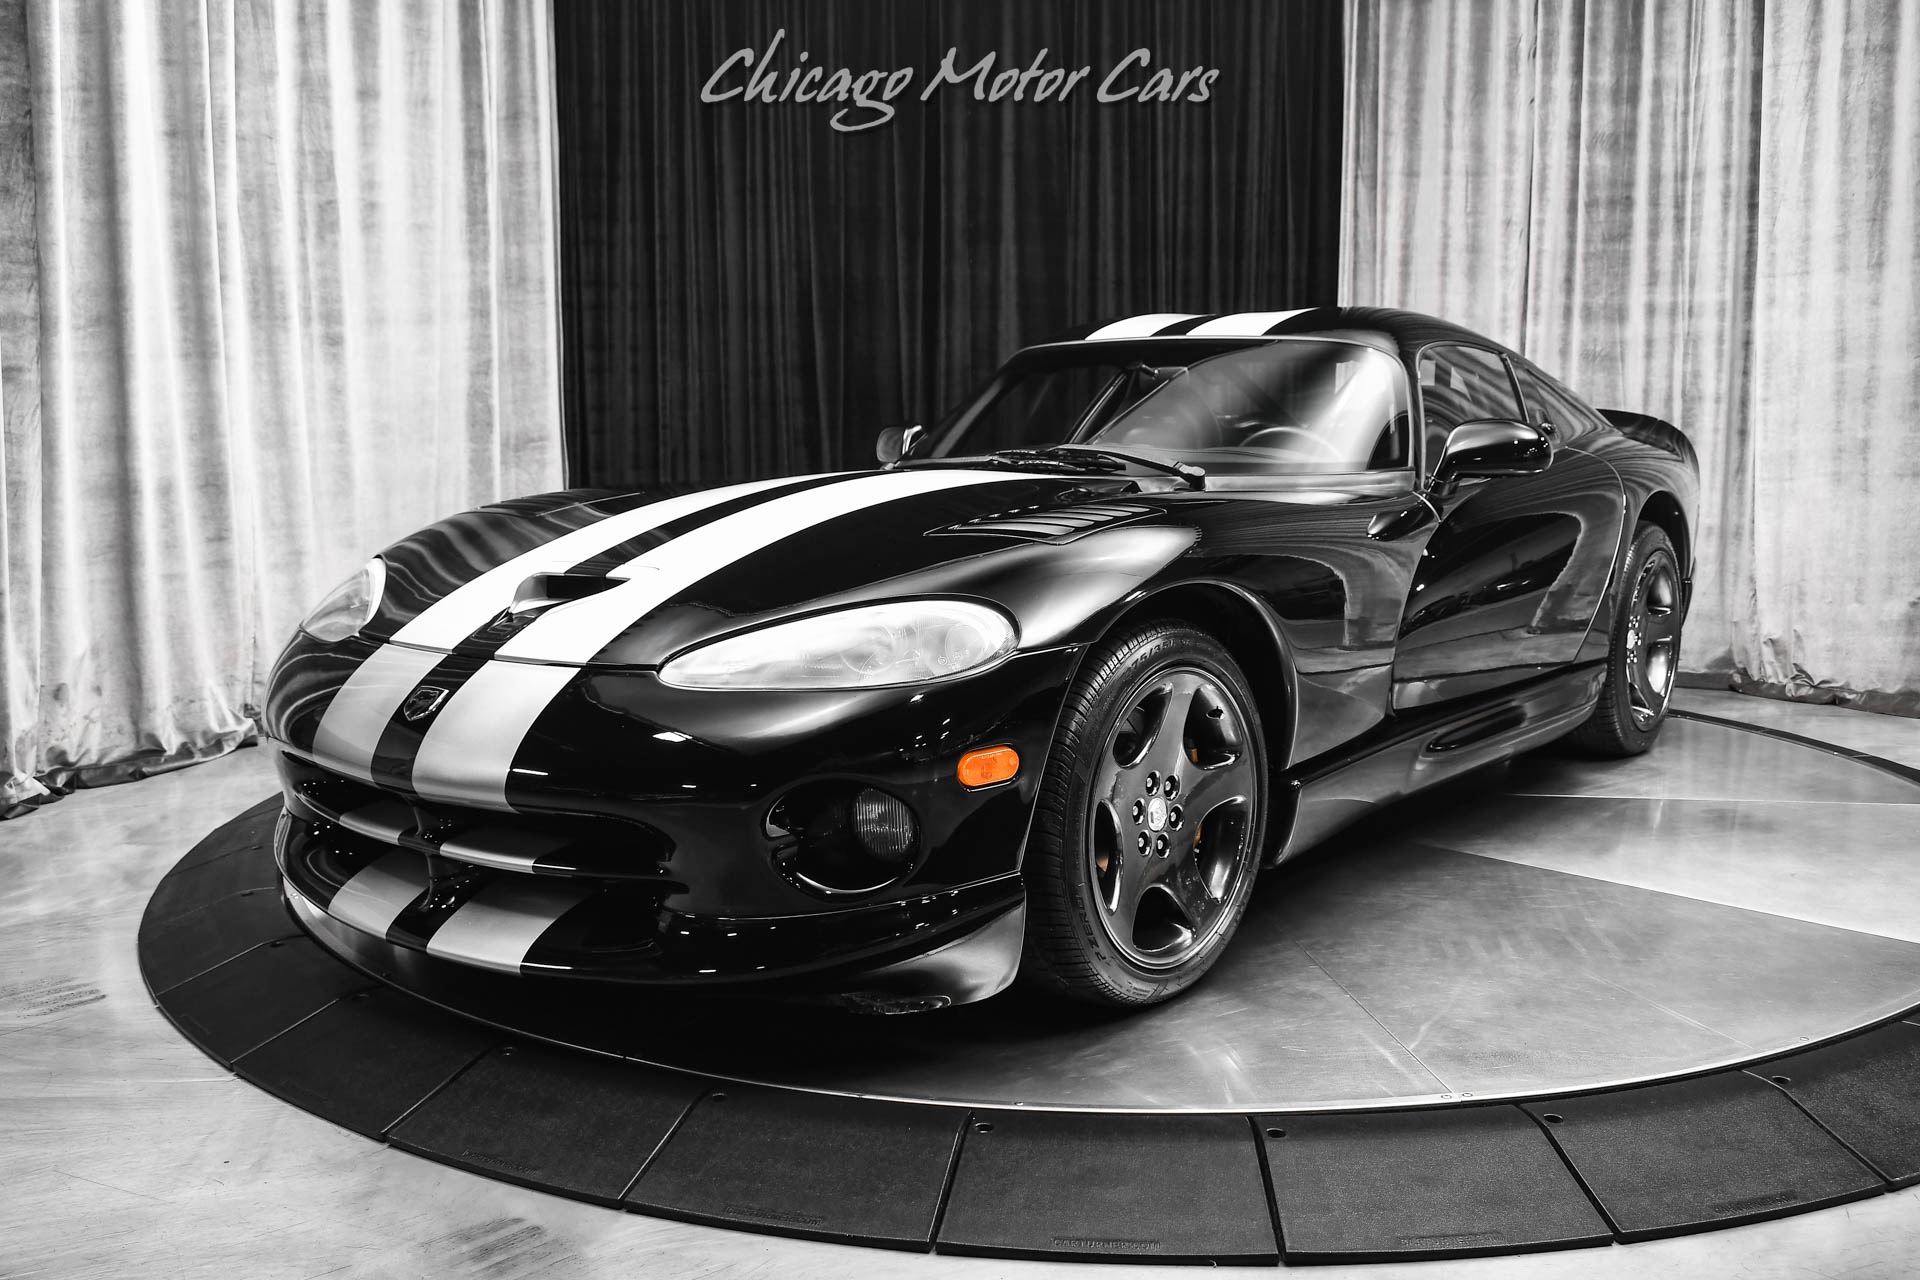 Used-2000-Dodge-Viper-GTS-Only-24k-Miles-500HP-6-Speed-Manual-Hot-Color-Combo